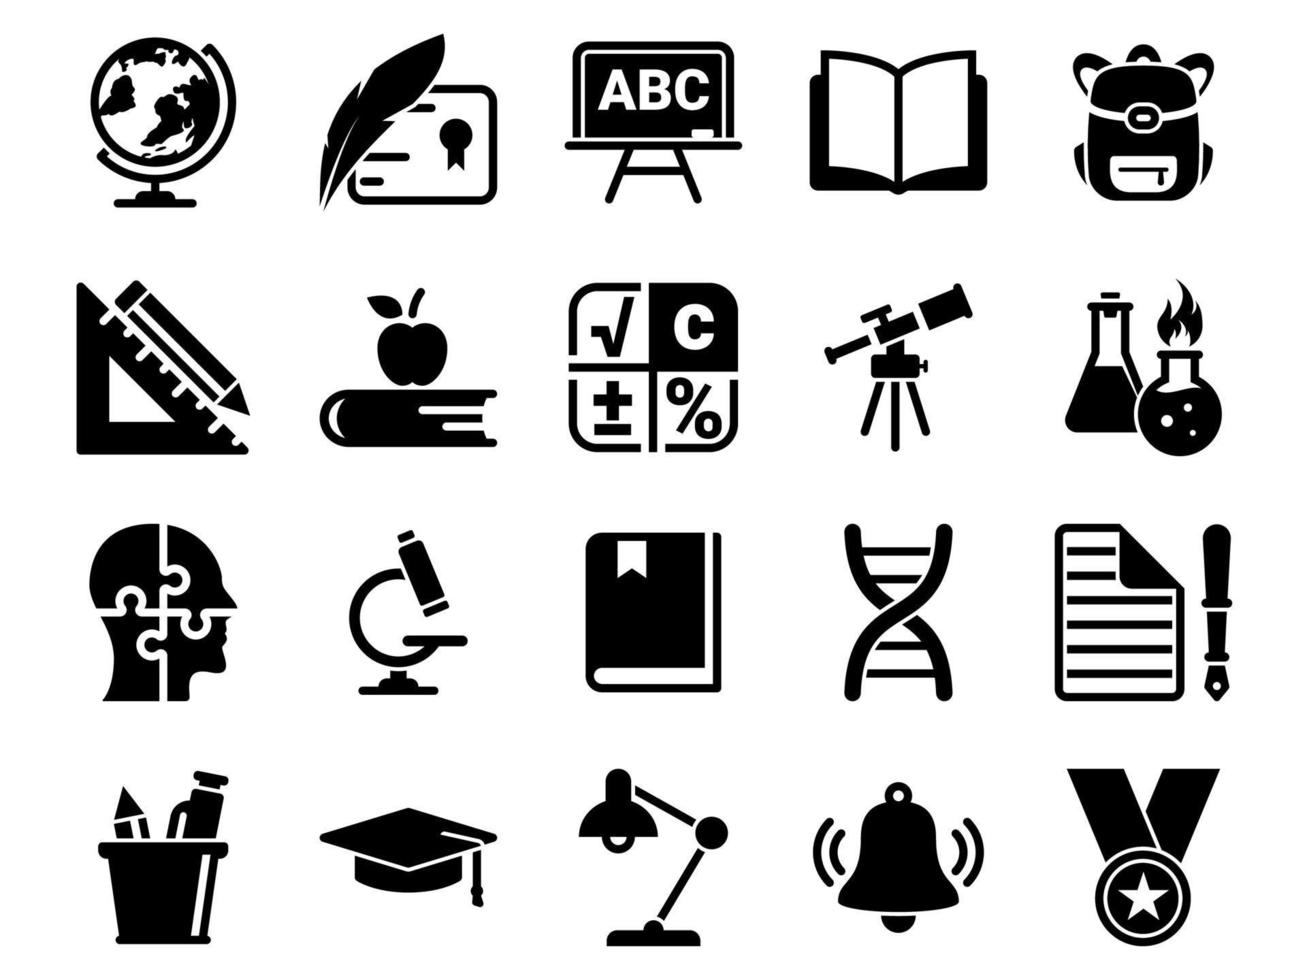 Set of simple icons on a theme School, education, education, vector, design, collection, flat, sign, symbol,element, object, illustration. Black icons isolated against white background vector